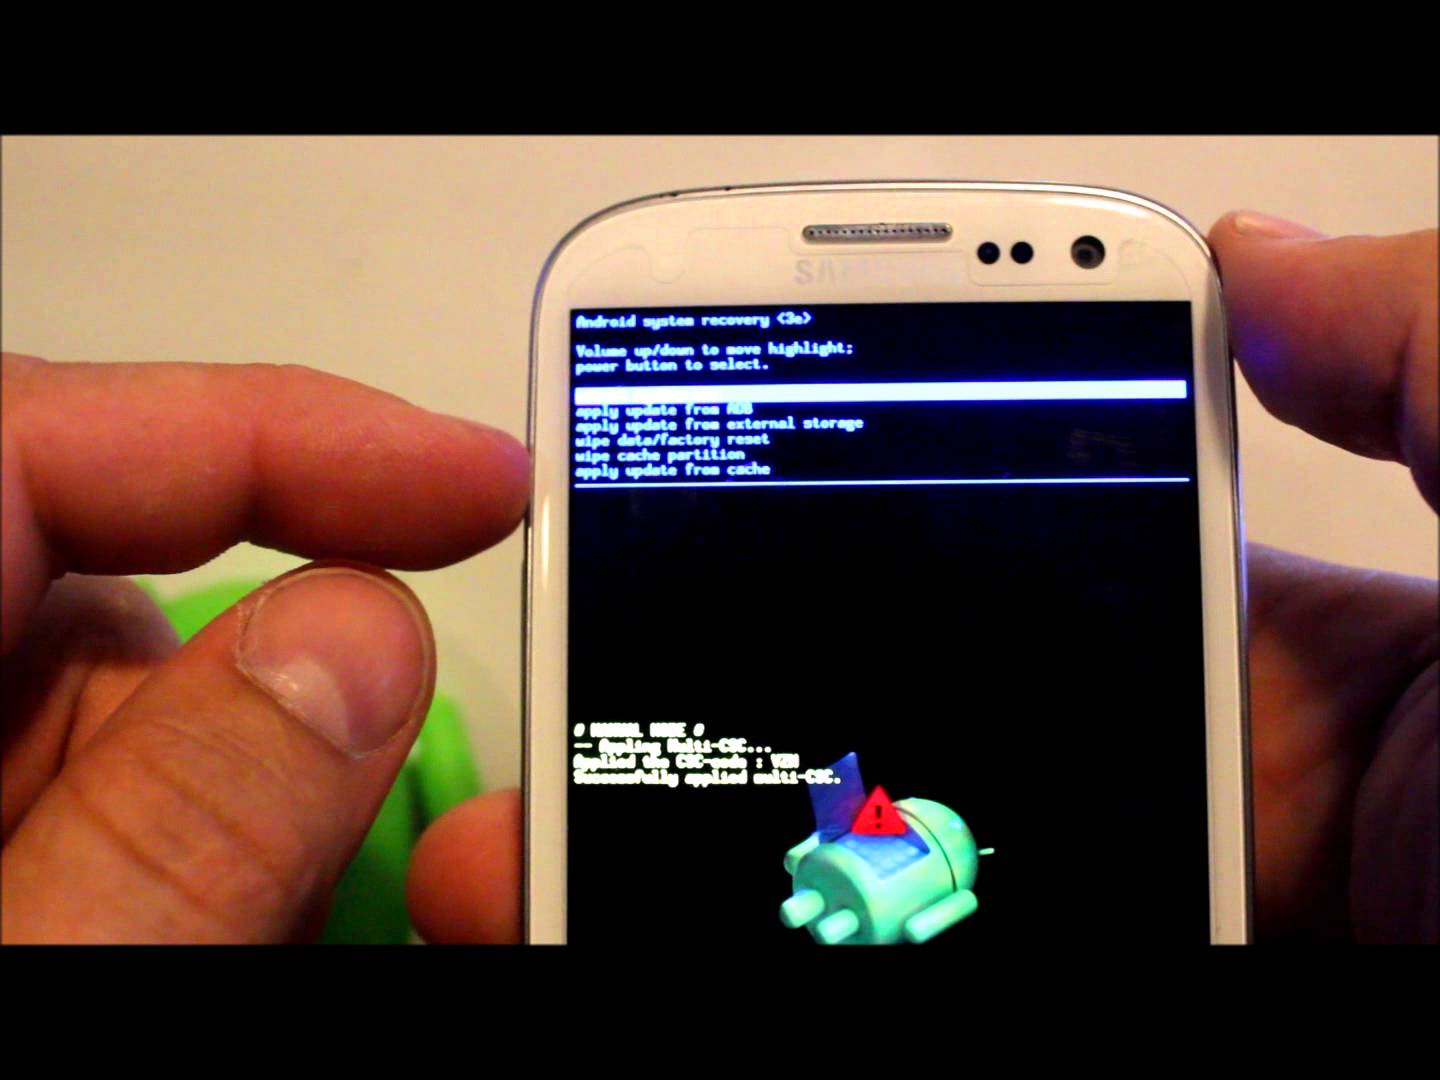 samsung galaxy s3 recovery mode